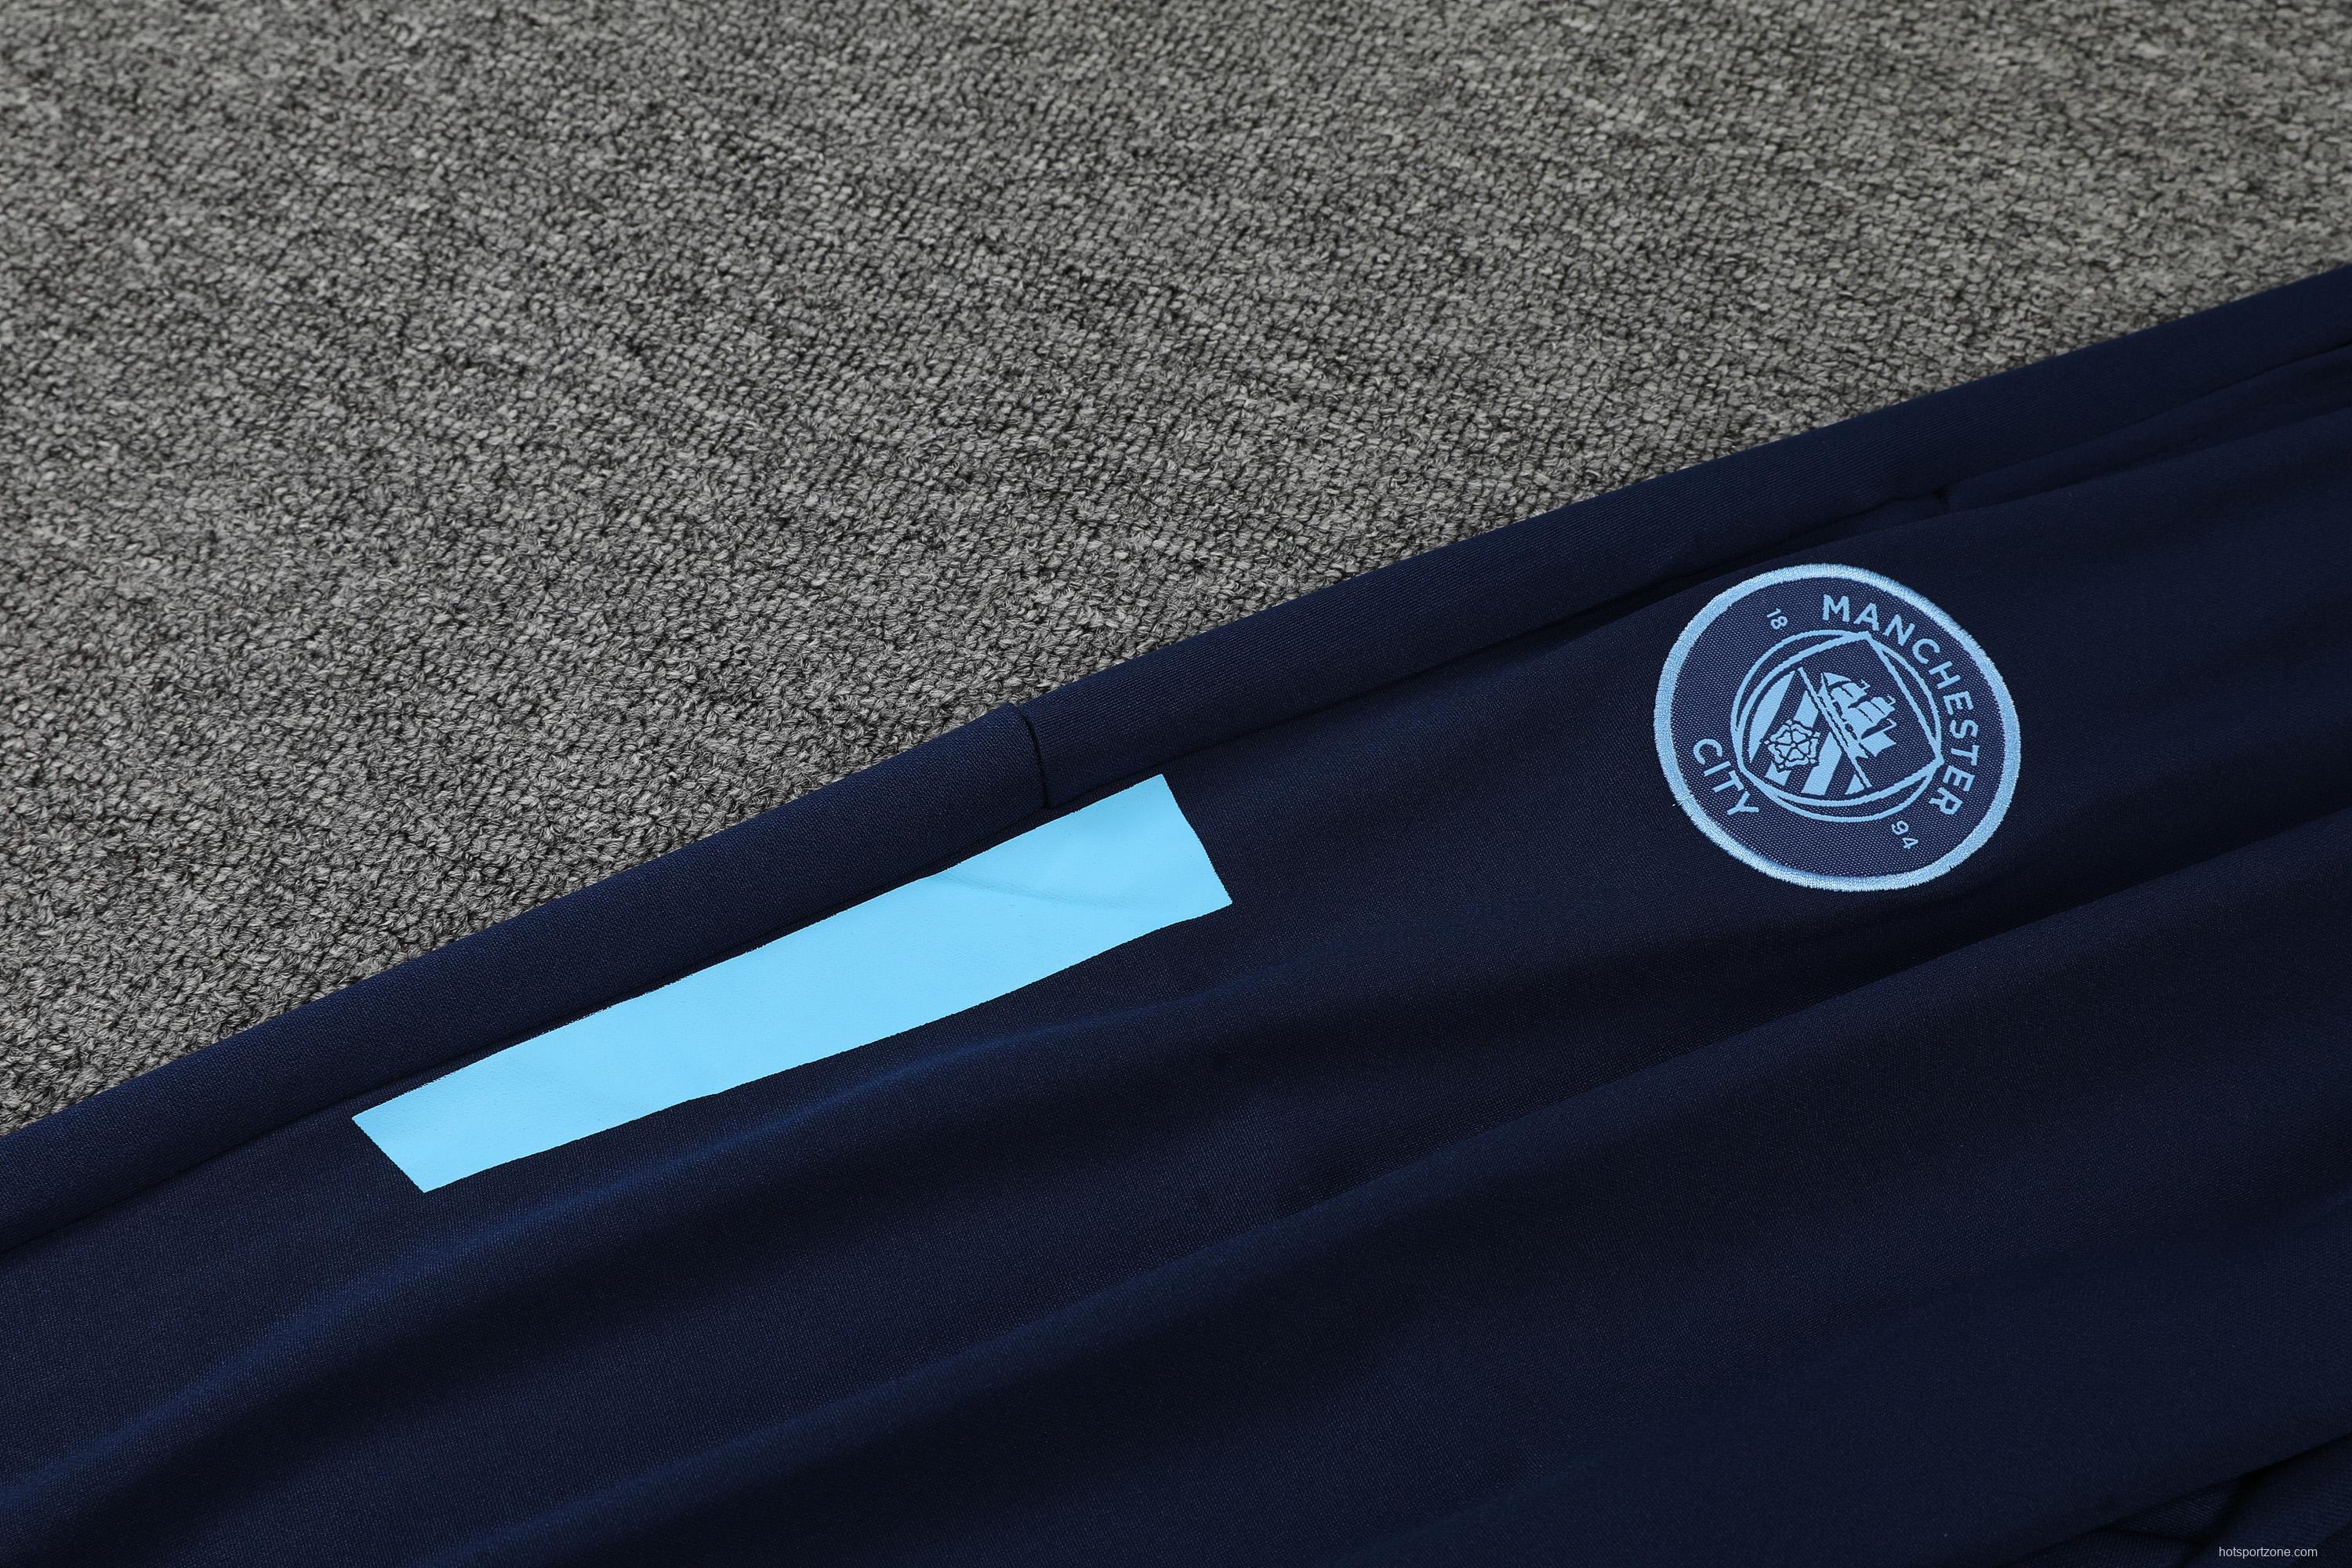 Manchester City POLO kit blue and white (not sold separately)